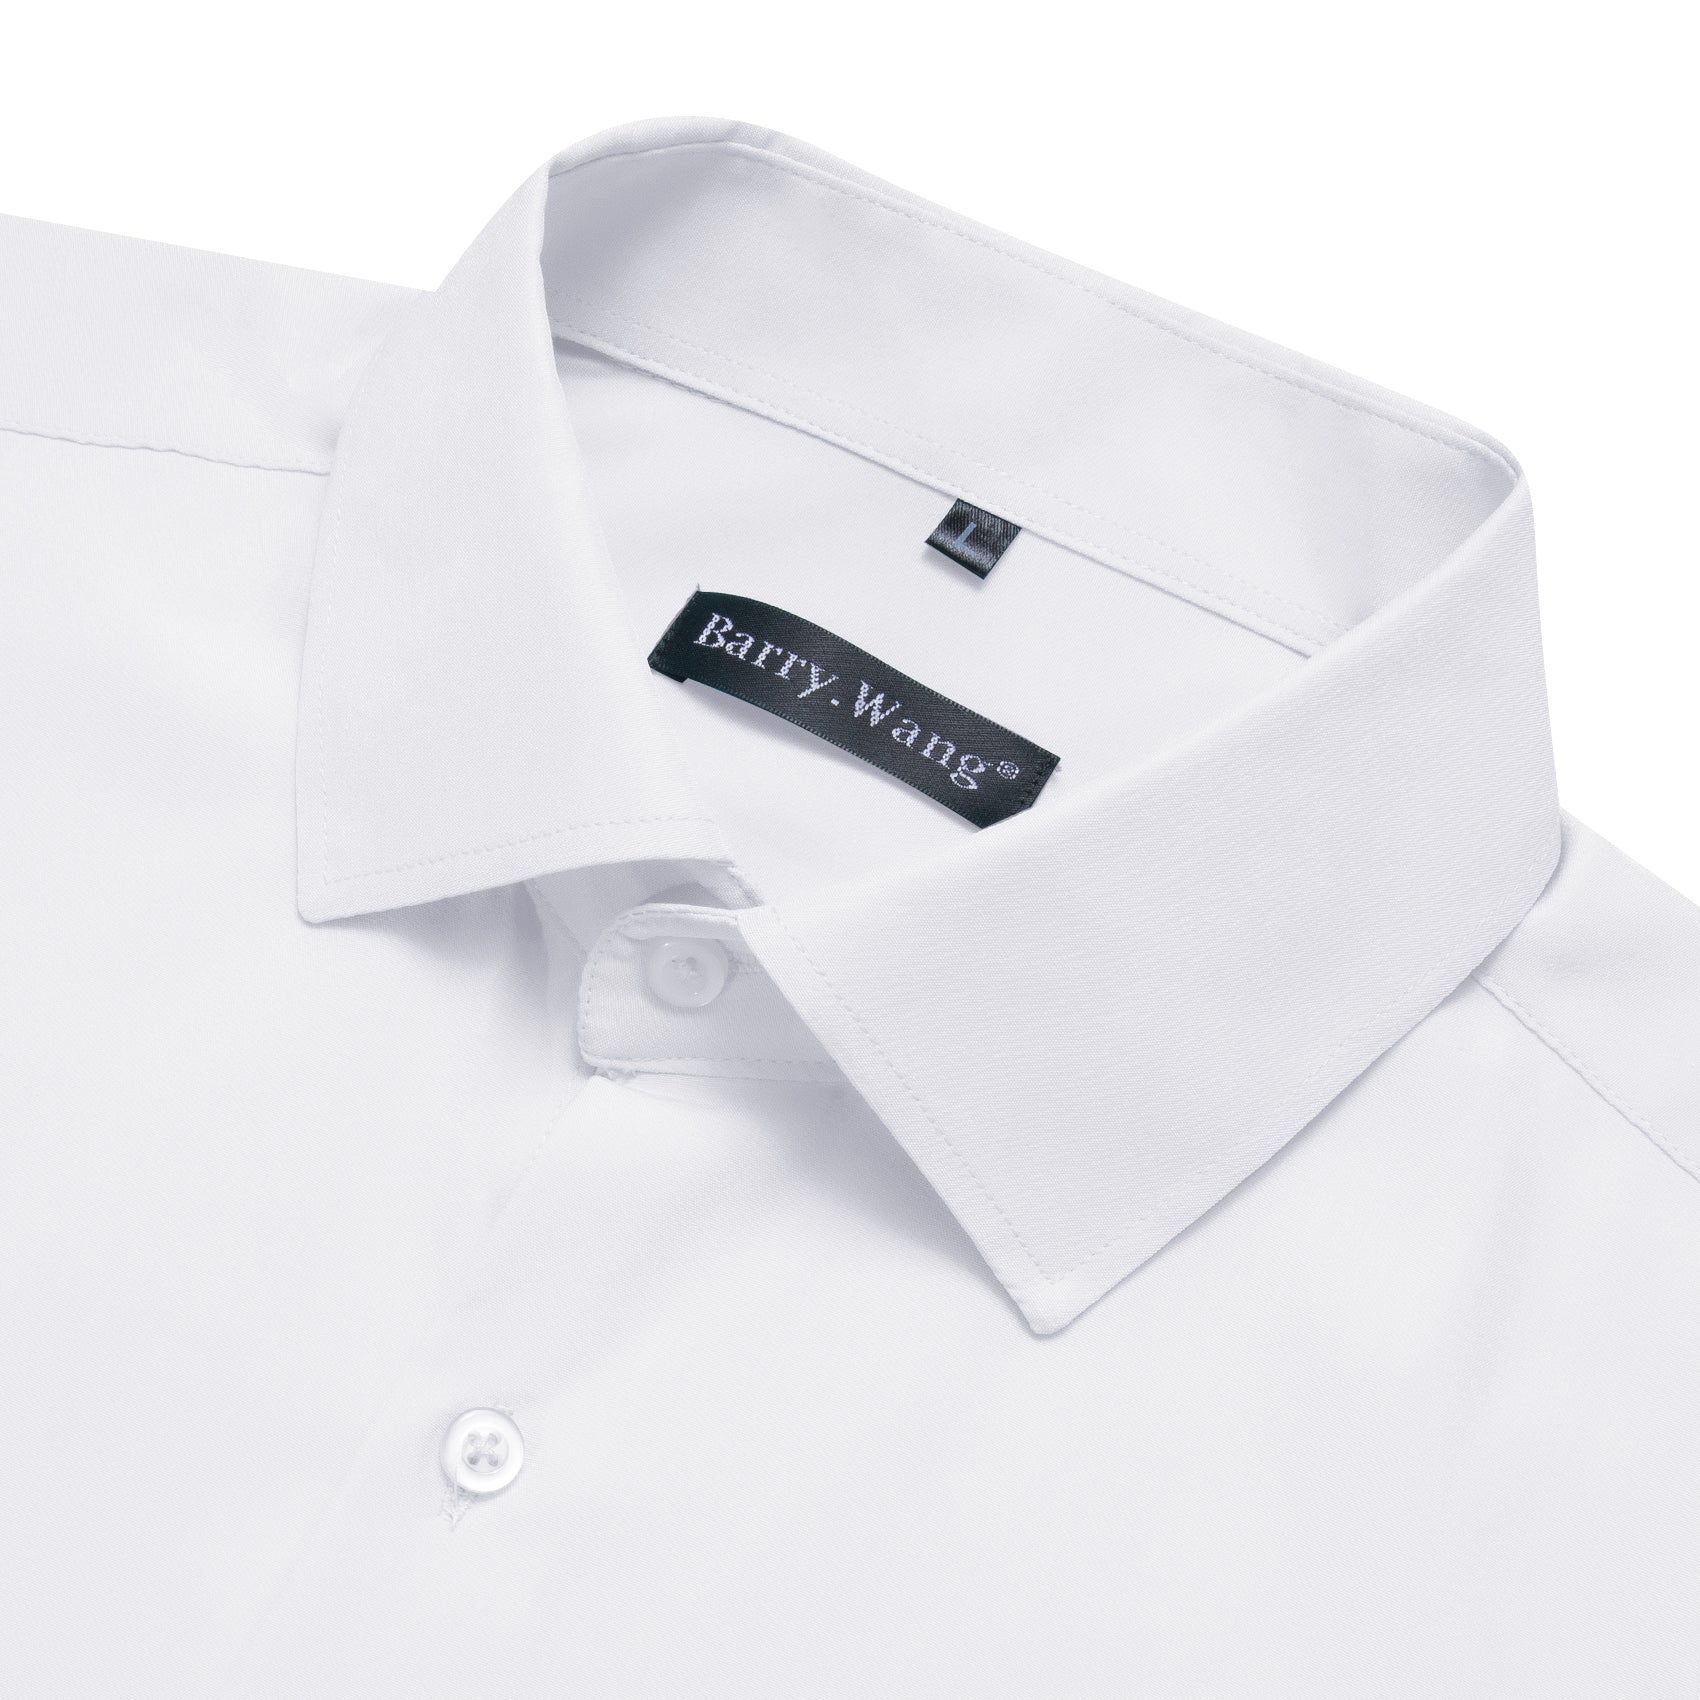 Barry.wang White Solid Short Sleeves Shirt